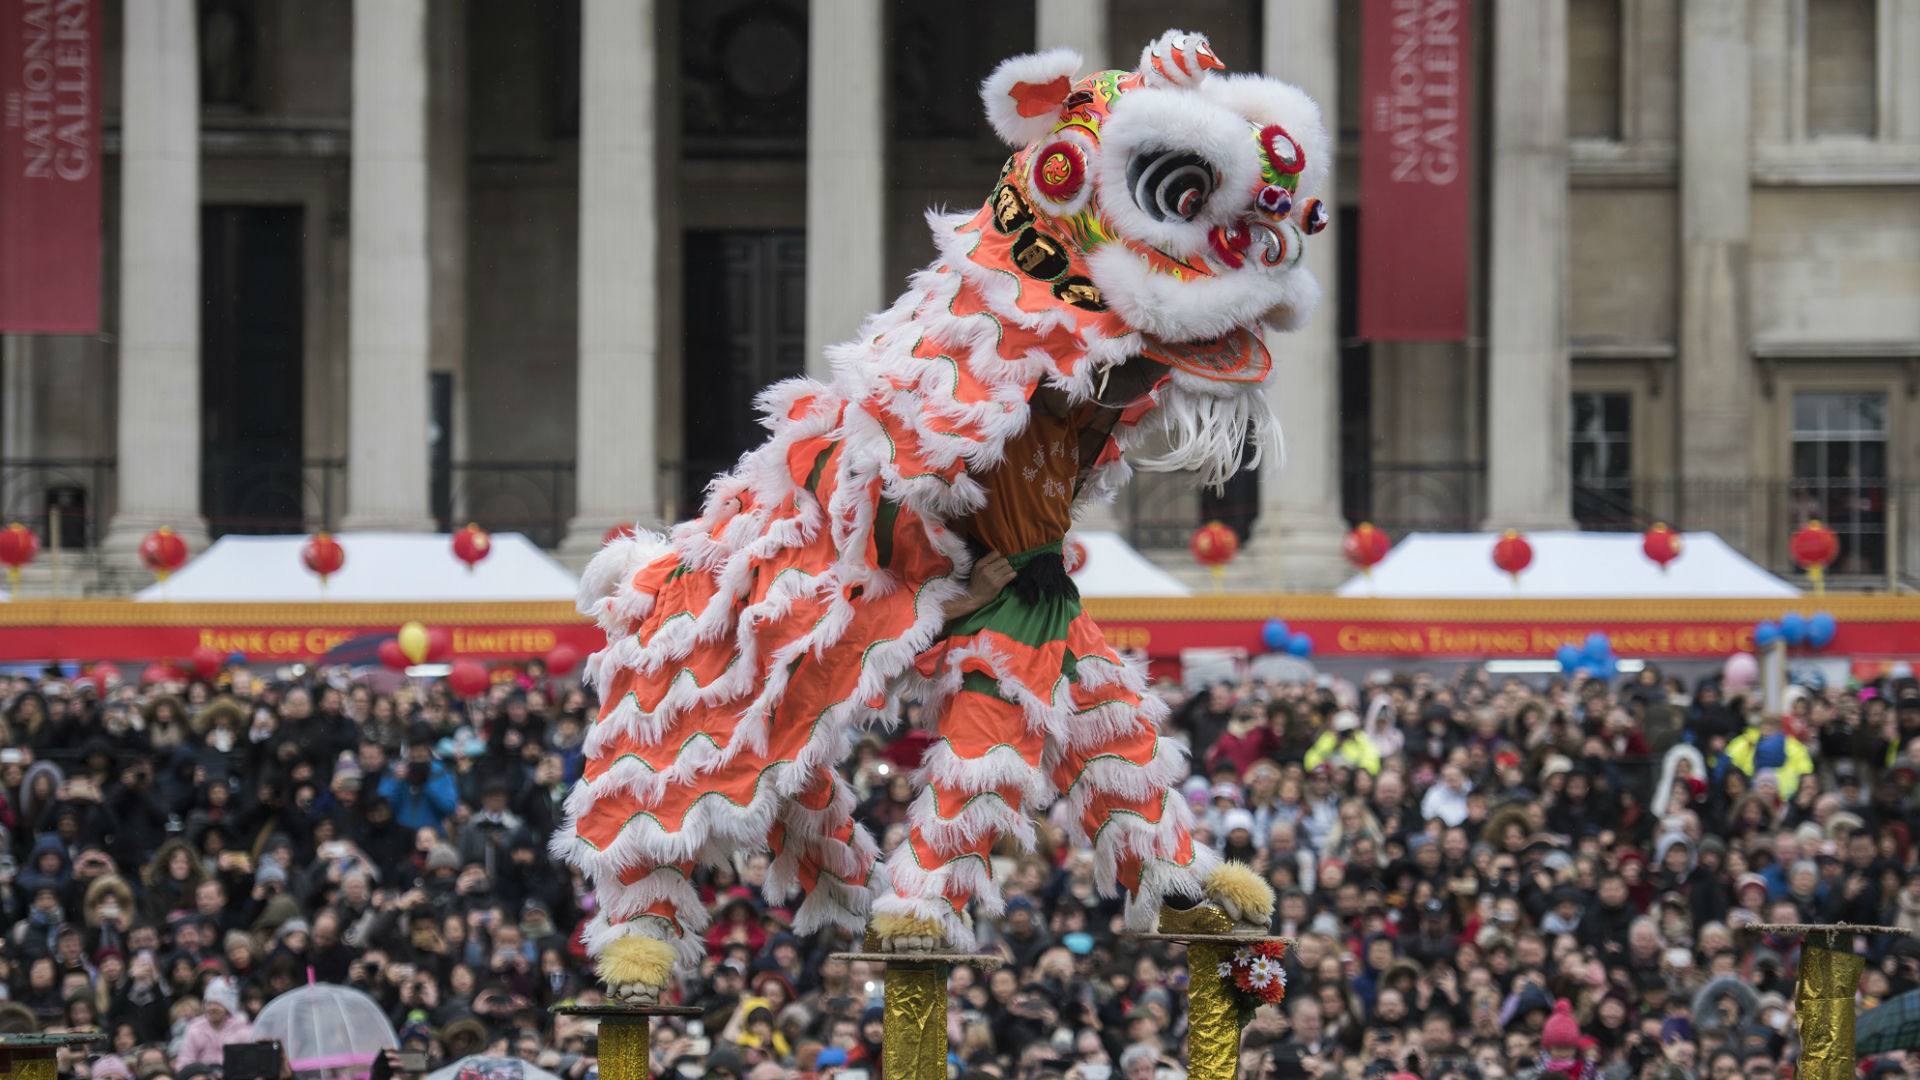 A lion dance takes place among the crowds during Chinese New Year in Trafalgar Square 2017. © Greater London Authority